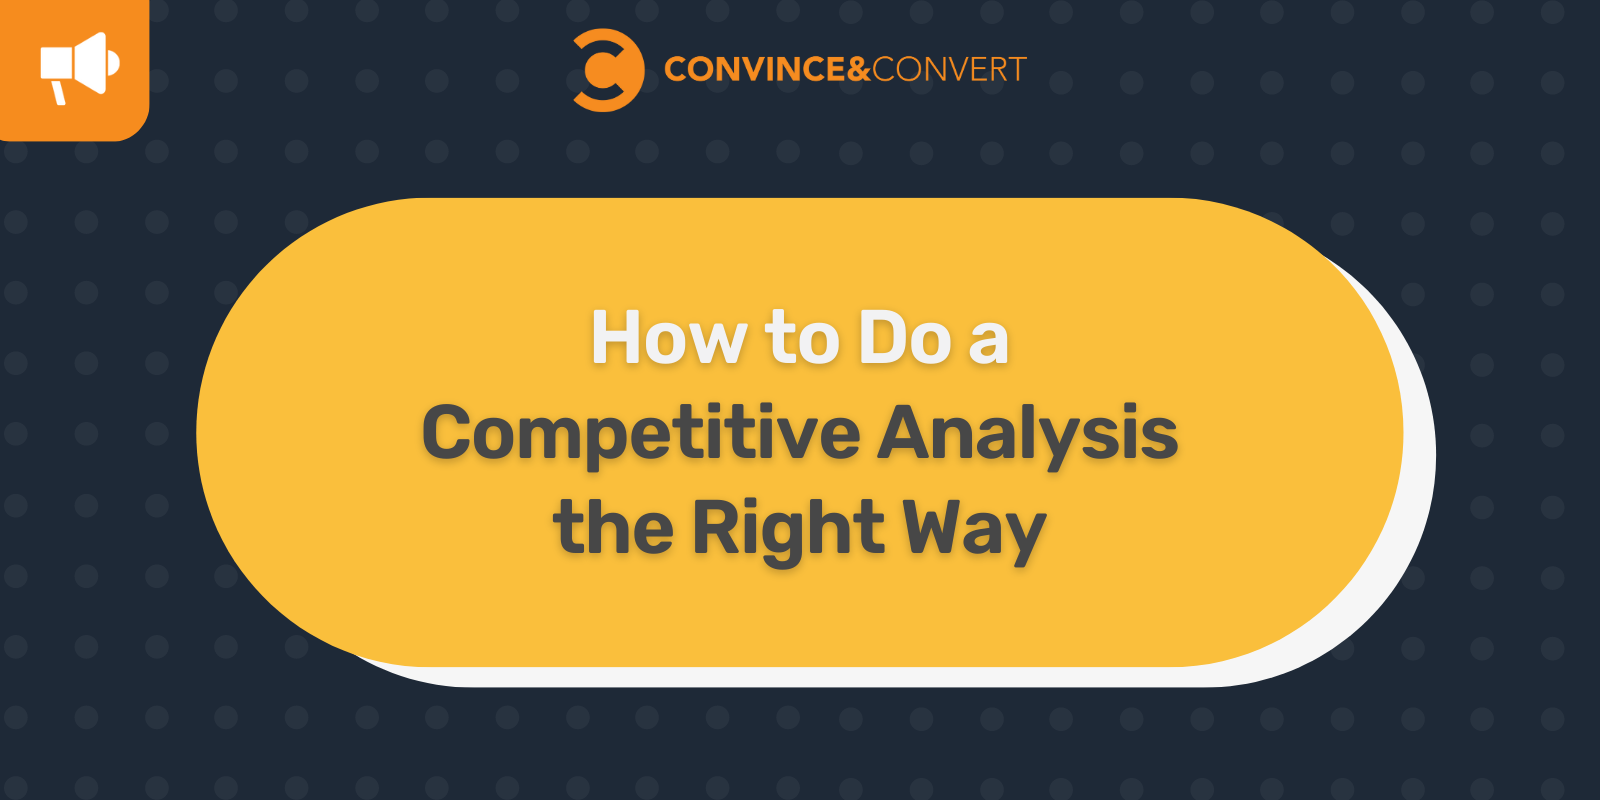 You are currently viewing How to Do a Competitive Analysis the Right Way